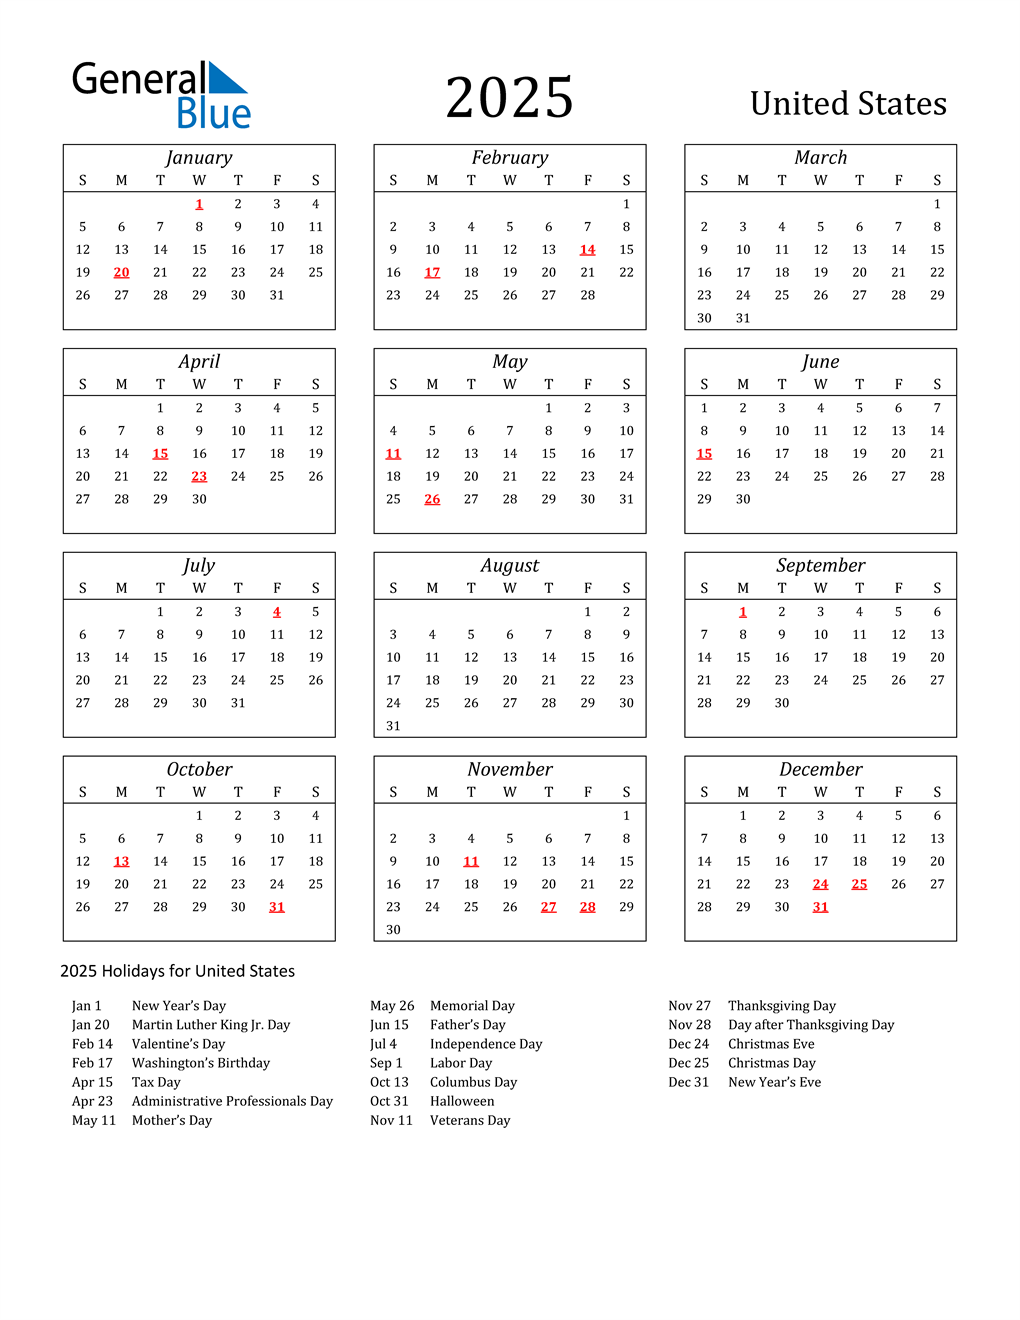 2025-united-states-calendar-with-holidays